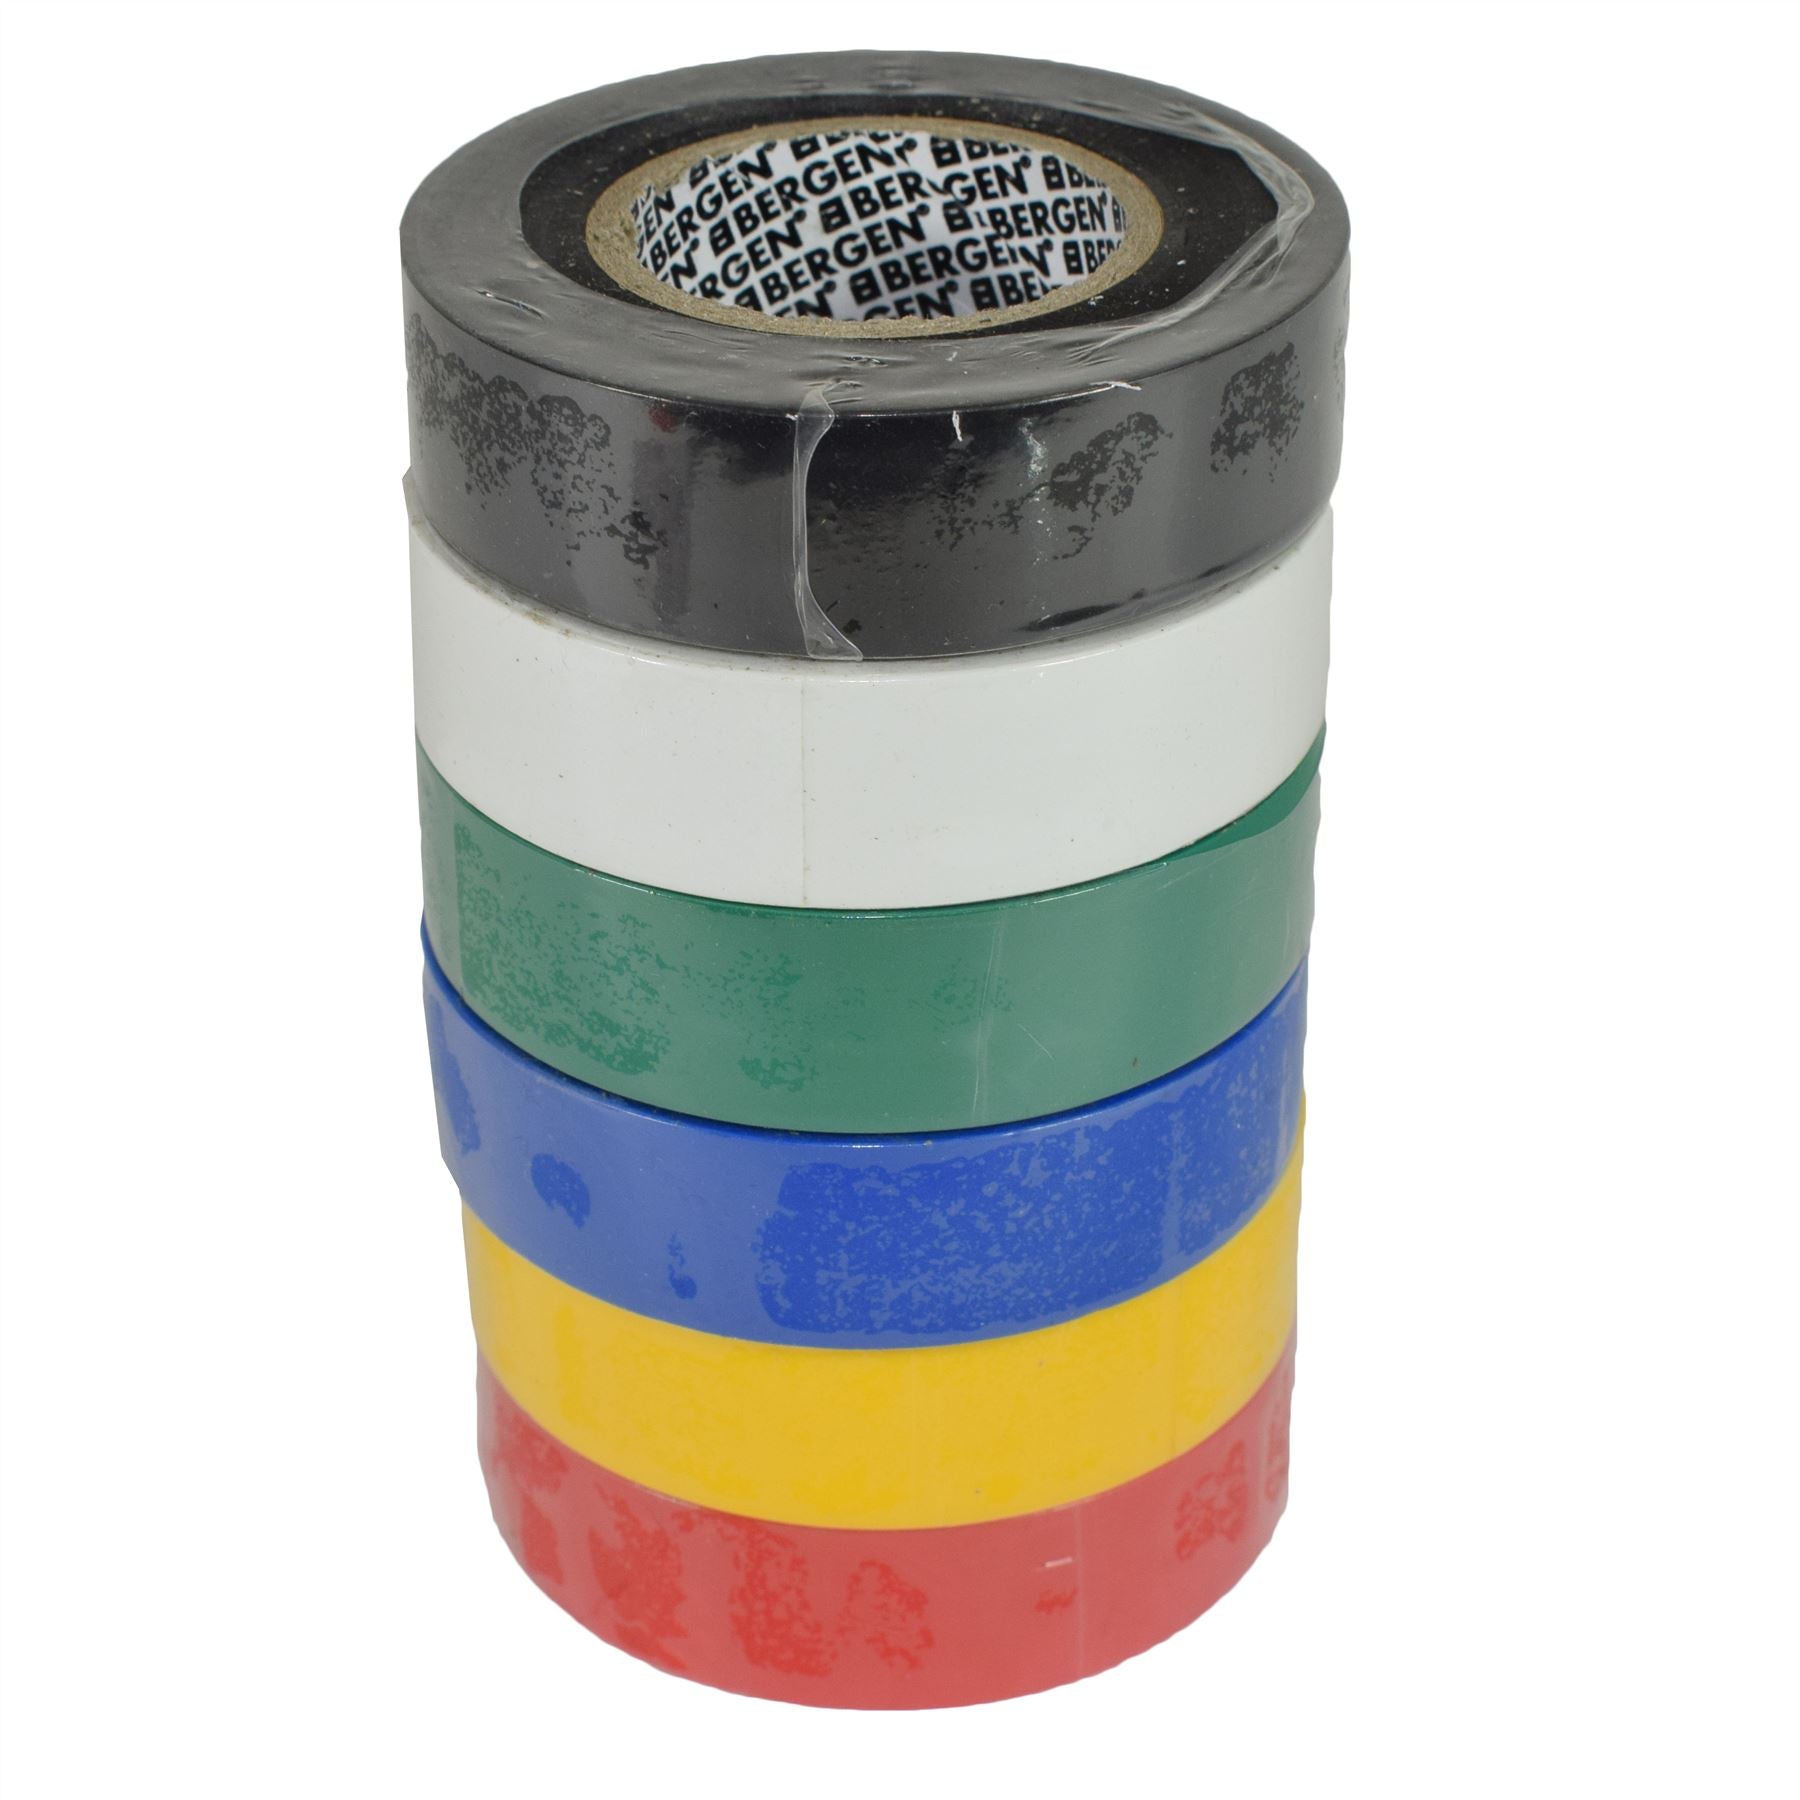 PVC Insulation Electricians Electrical Tape Mixed Colour 6 Reels Flame Retardant